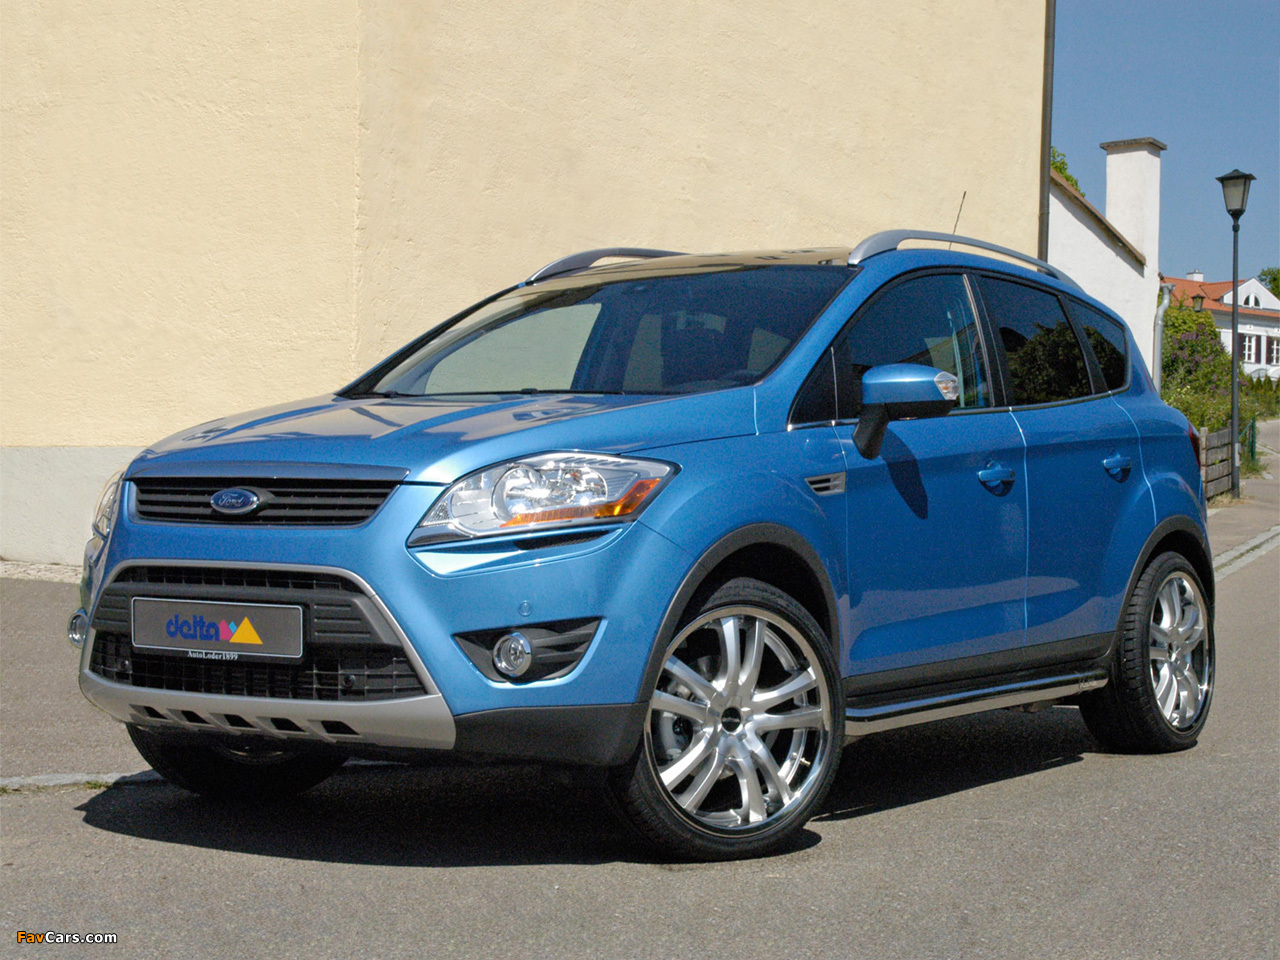 Pictures of Delta Tuning Ford Kuga 2008 (1280x960)